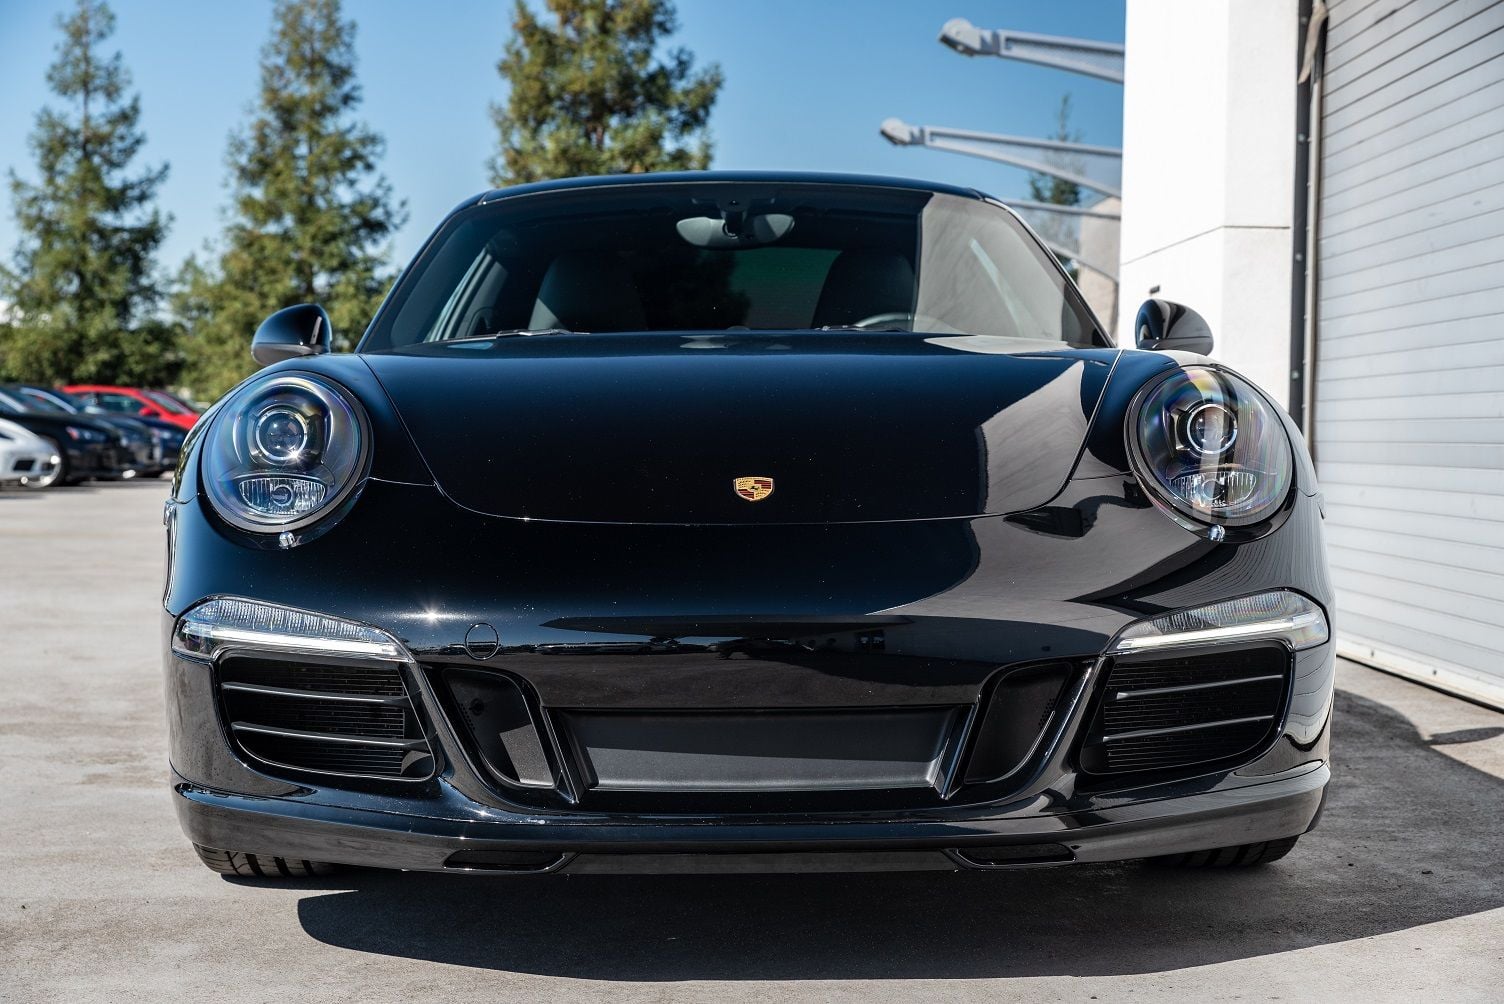 2013 Porsche 911 - Aerokit 911 under 20k miles - Used - VIN WP0AA2A96DS107736 - 19,457 Miles - 6 cyl - 2WD - Automatic - Coupe - Black - Fresno, CA 93650, United States